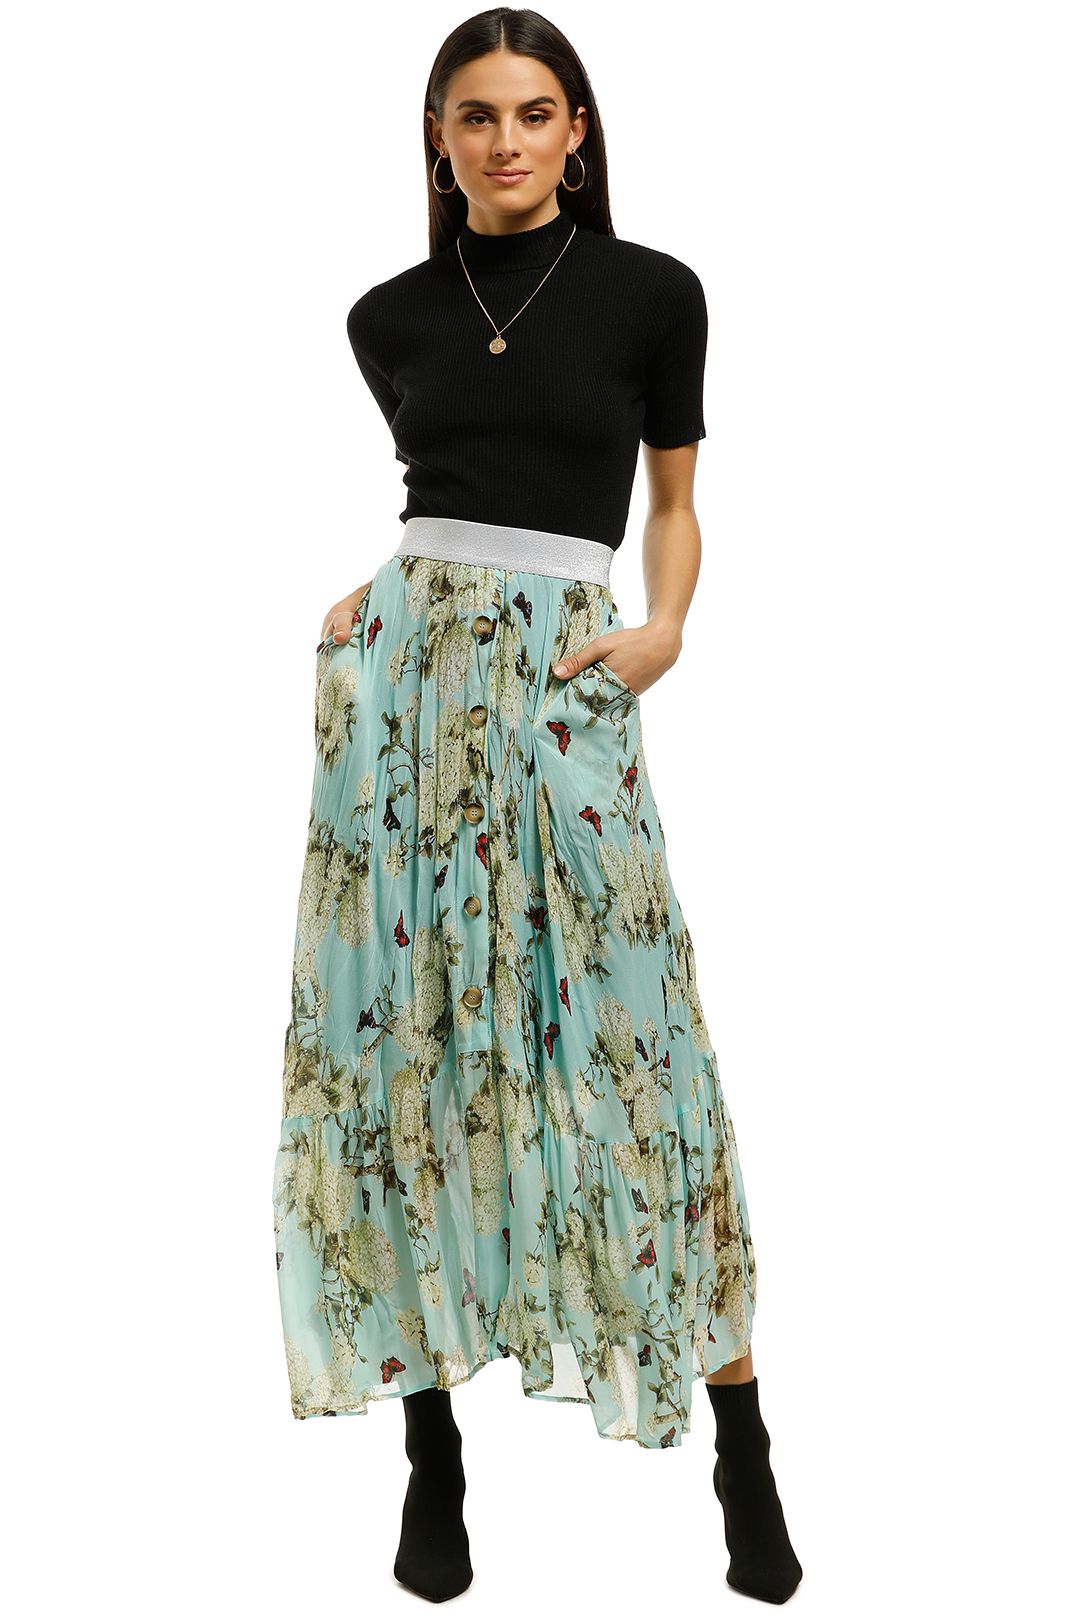 Curate-by-Trelise-Cooper-Long-Heart-Skirt-Floral-Front